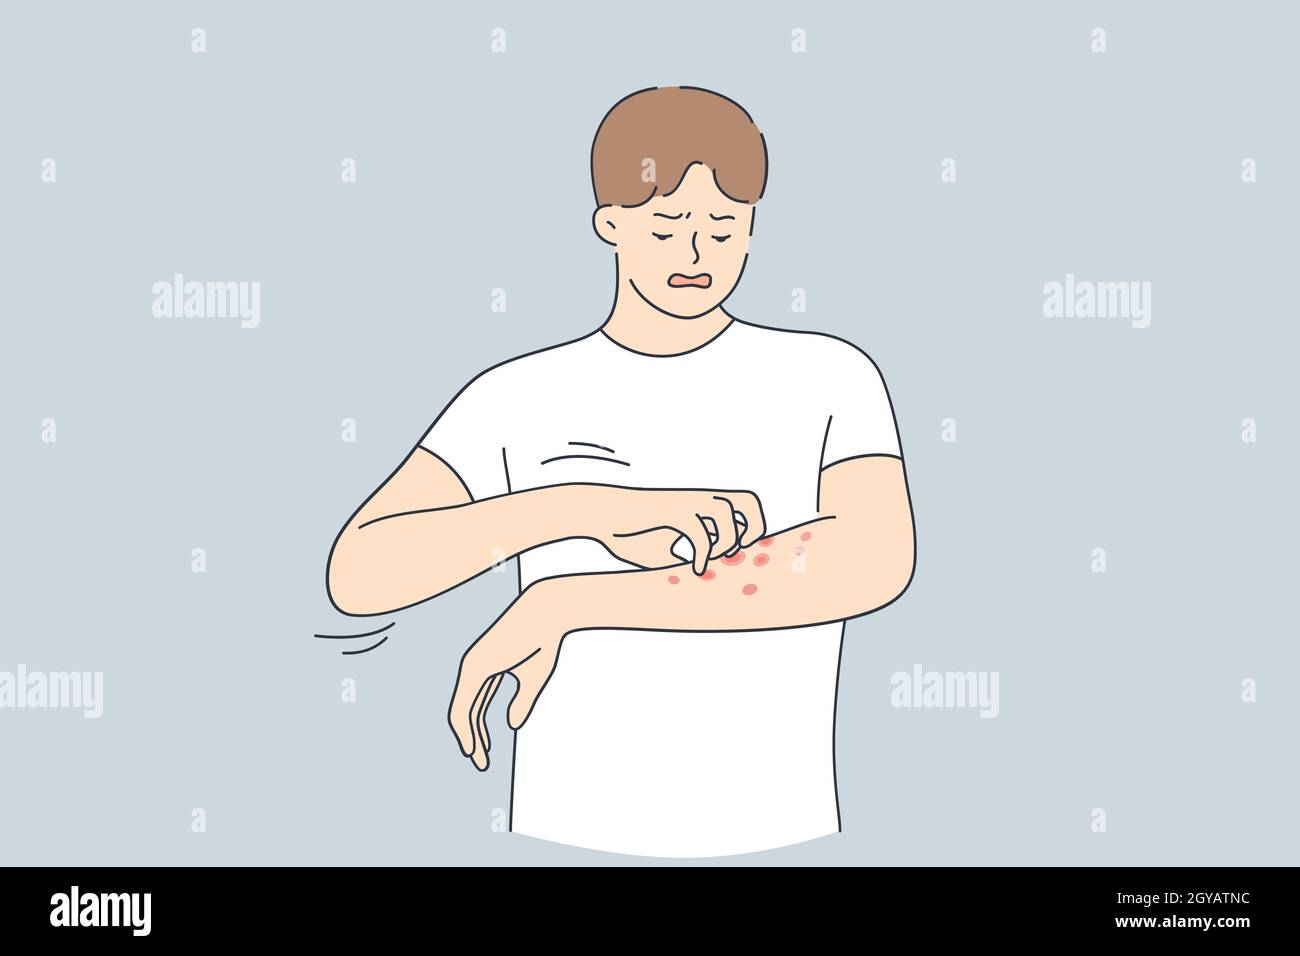 Skin allergy, Dermatitis, eczema concept. Annoyed young man in white t-shirt scratching itch on his arm feeling unhappy and uncomfortable vector illus Stock Photo